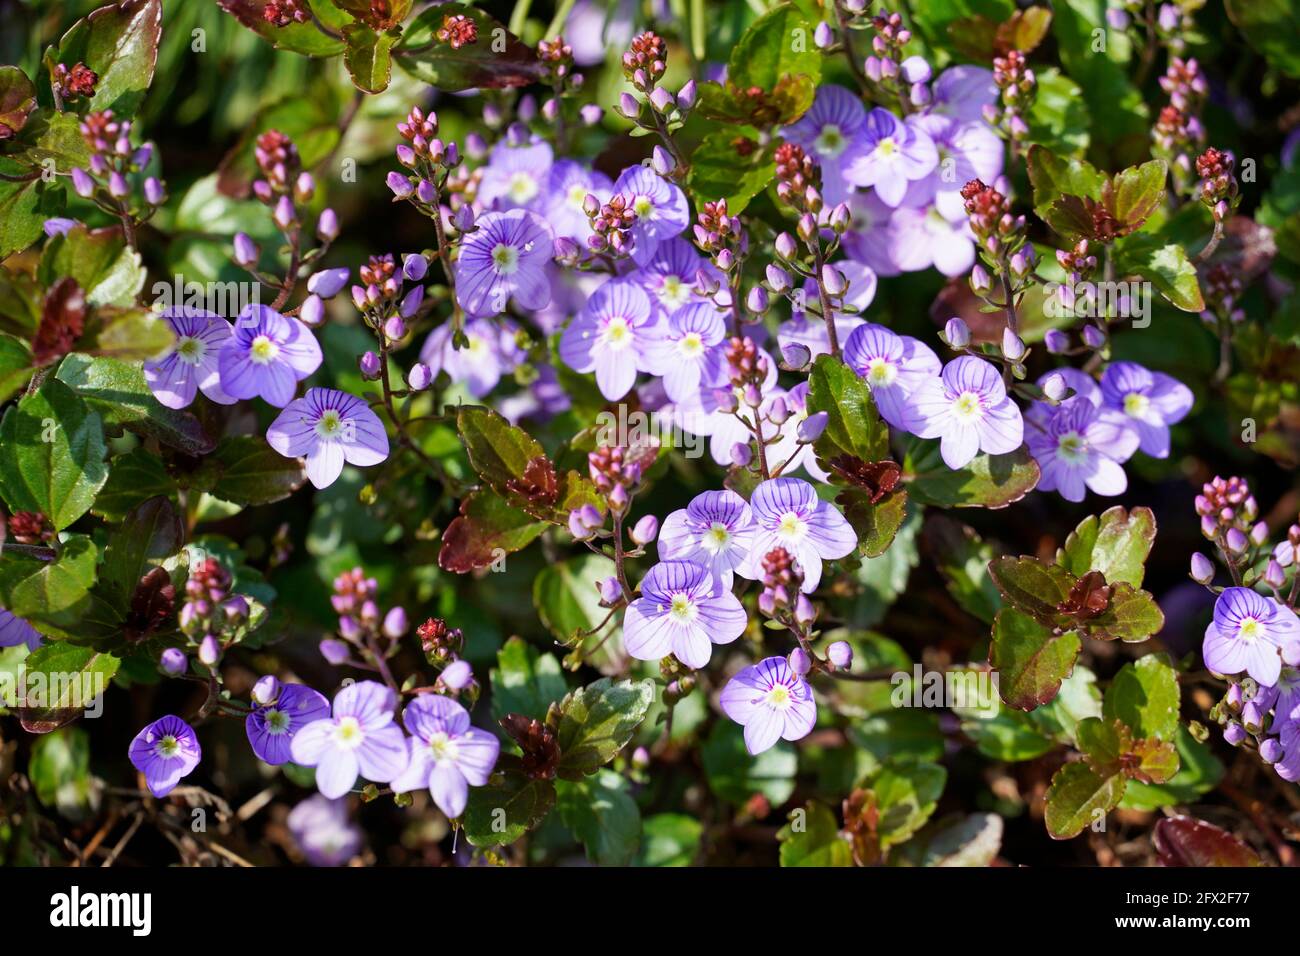 Fine purple flowers of the speedwell, Veronica. Hardy plants in the garden. Stock Photo